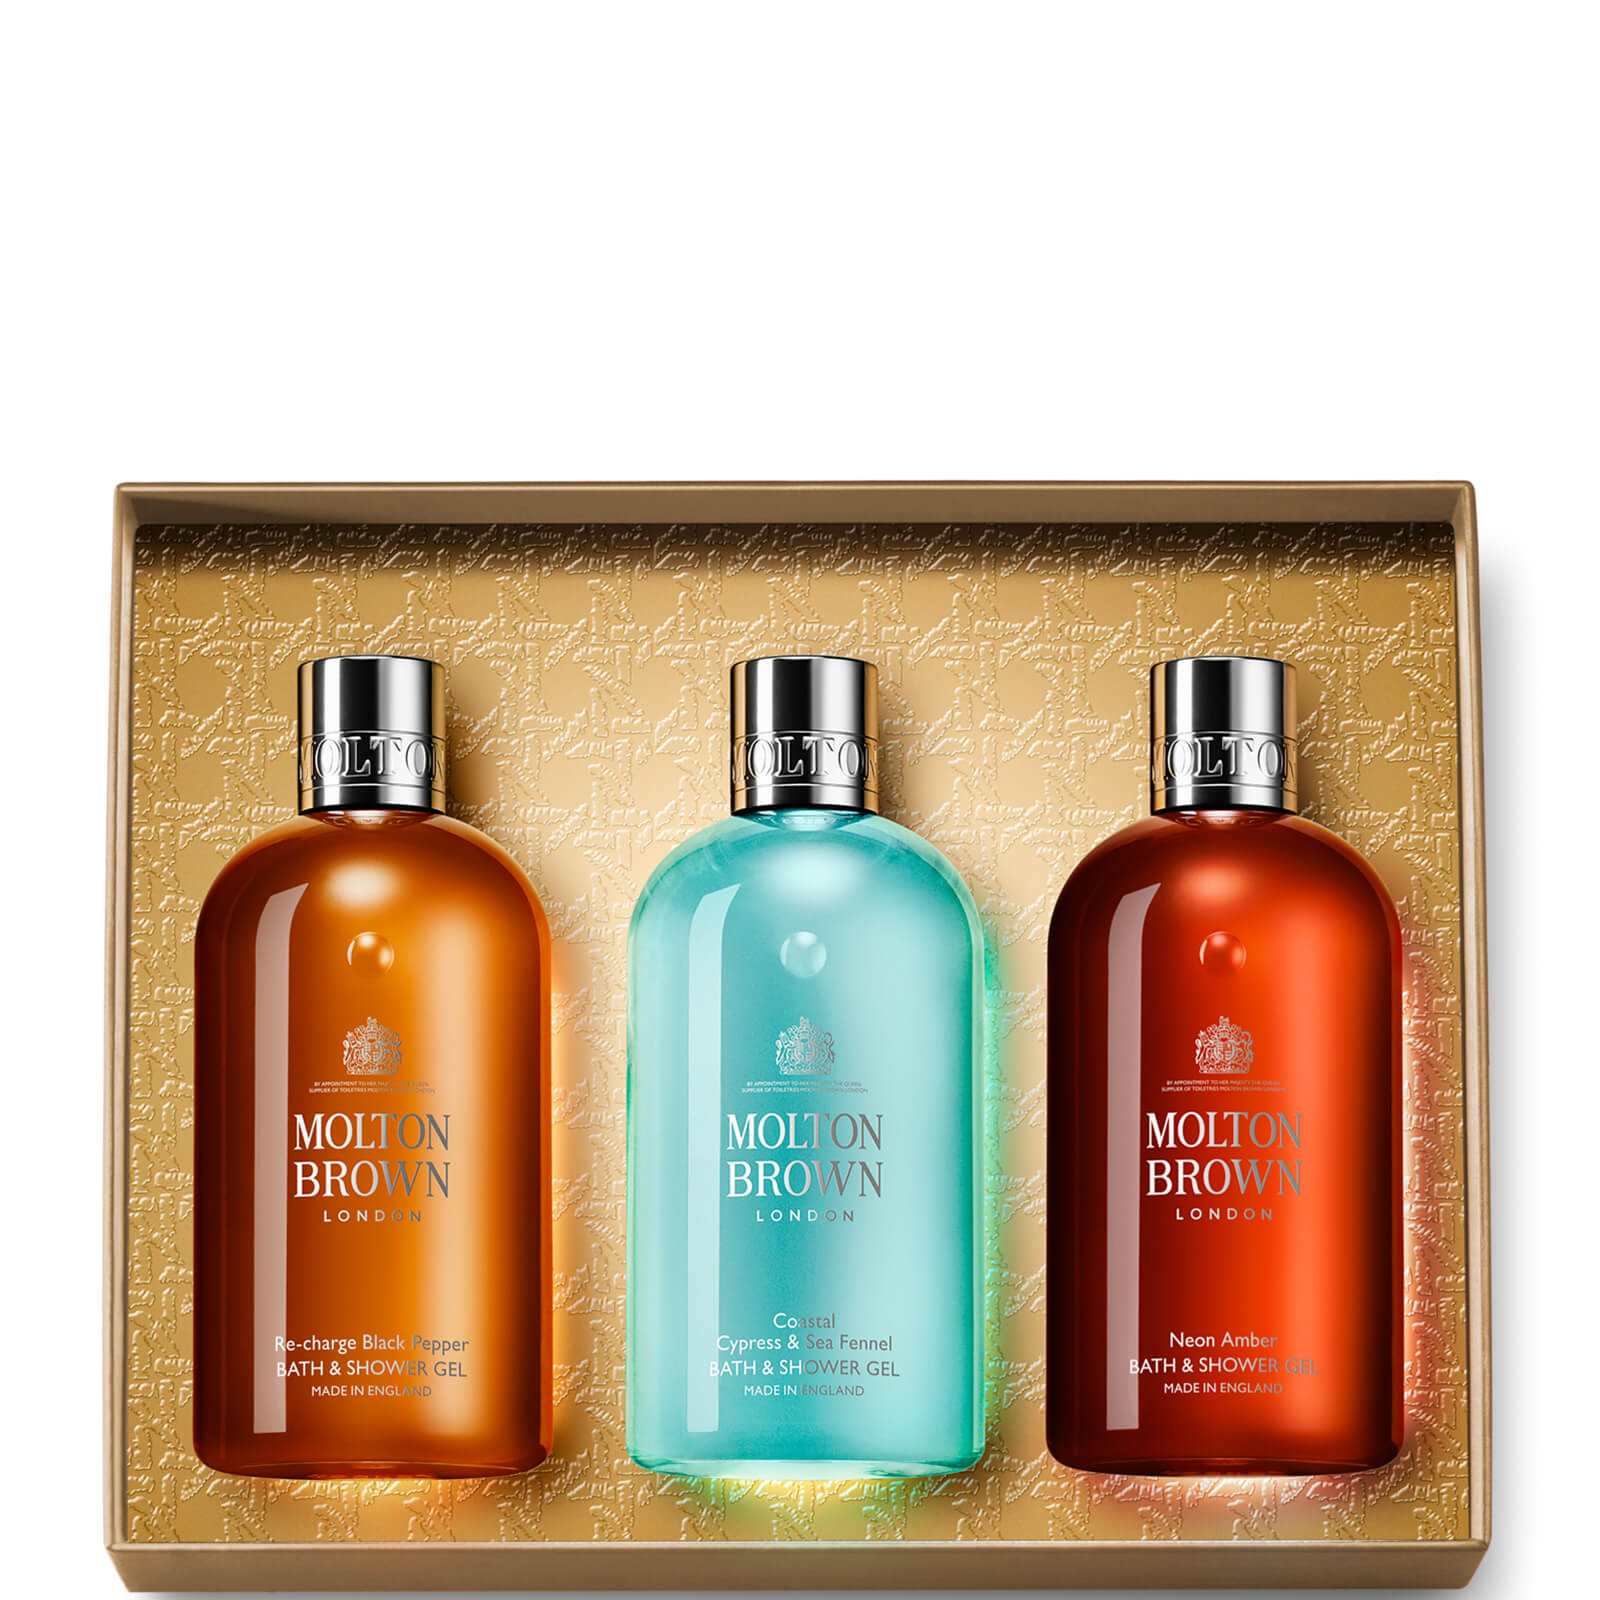 Molton Brown Woody and Aromatic Body Care Gift Set